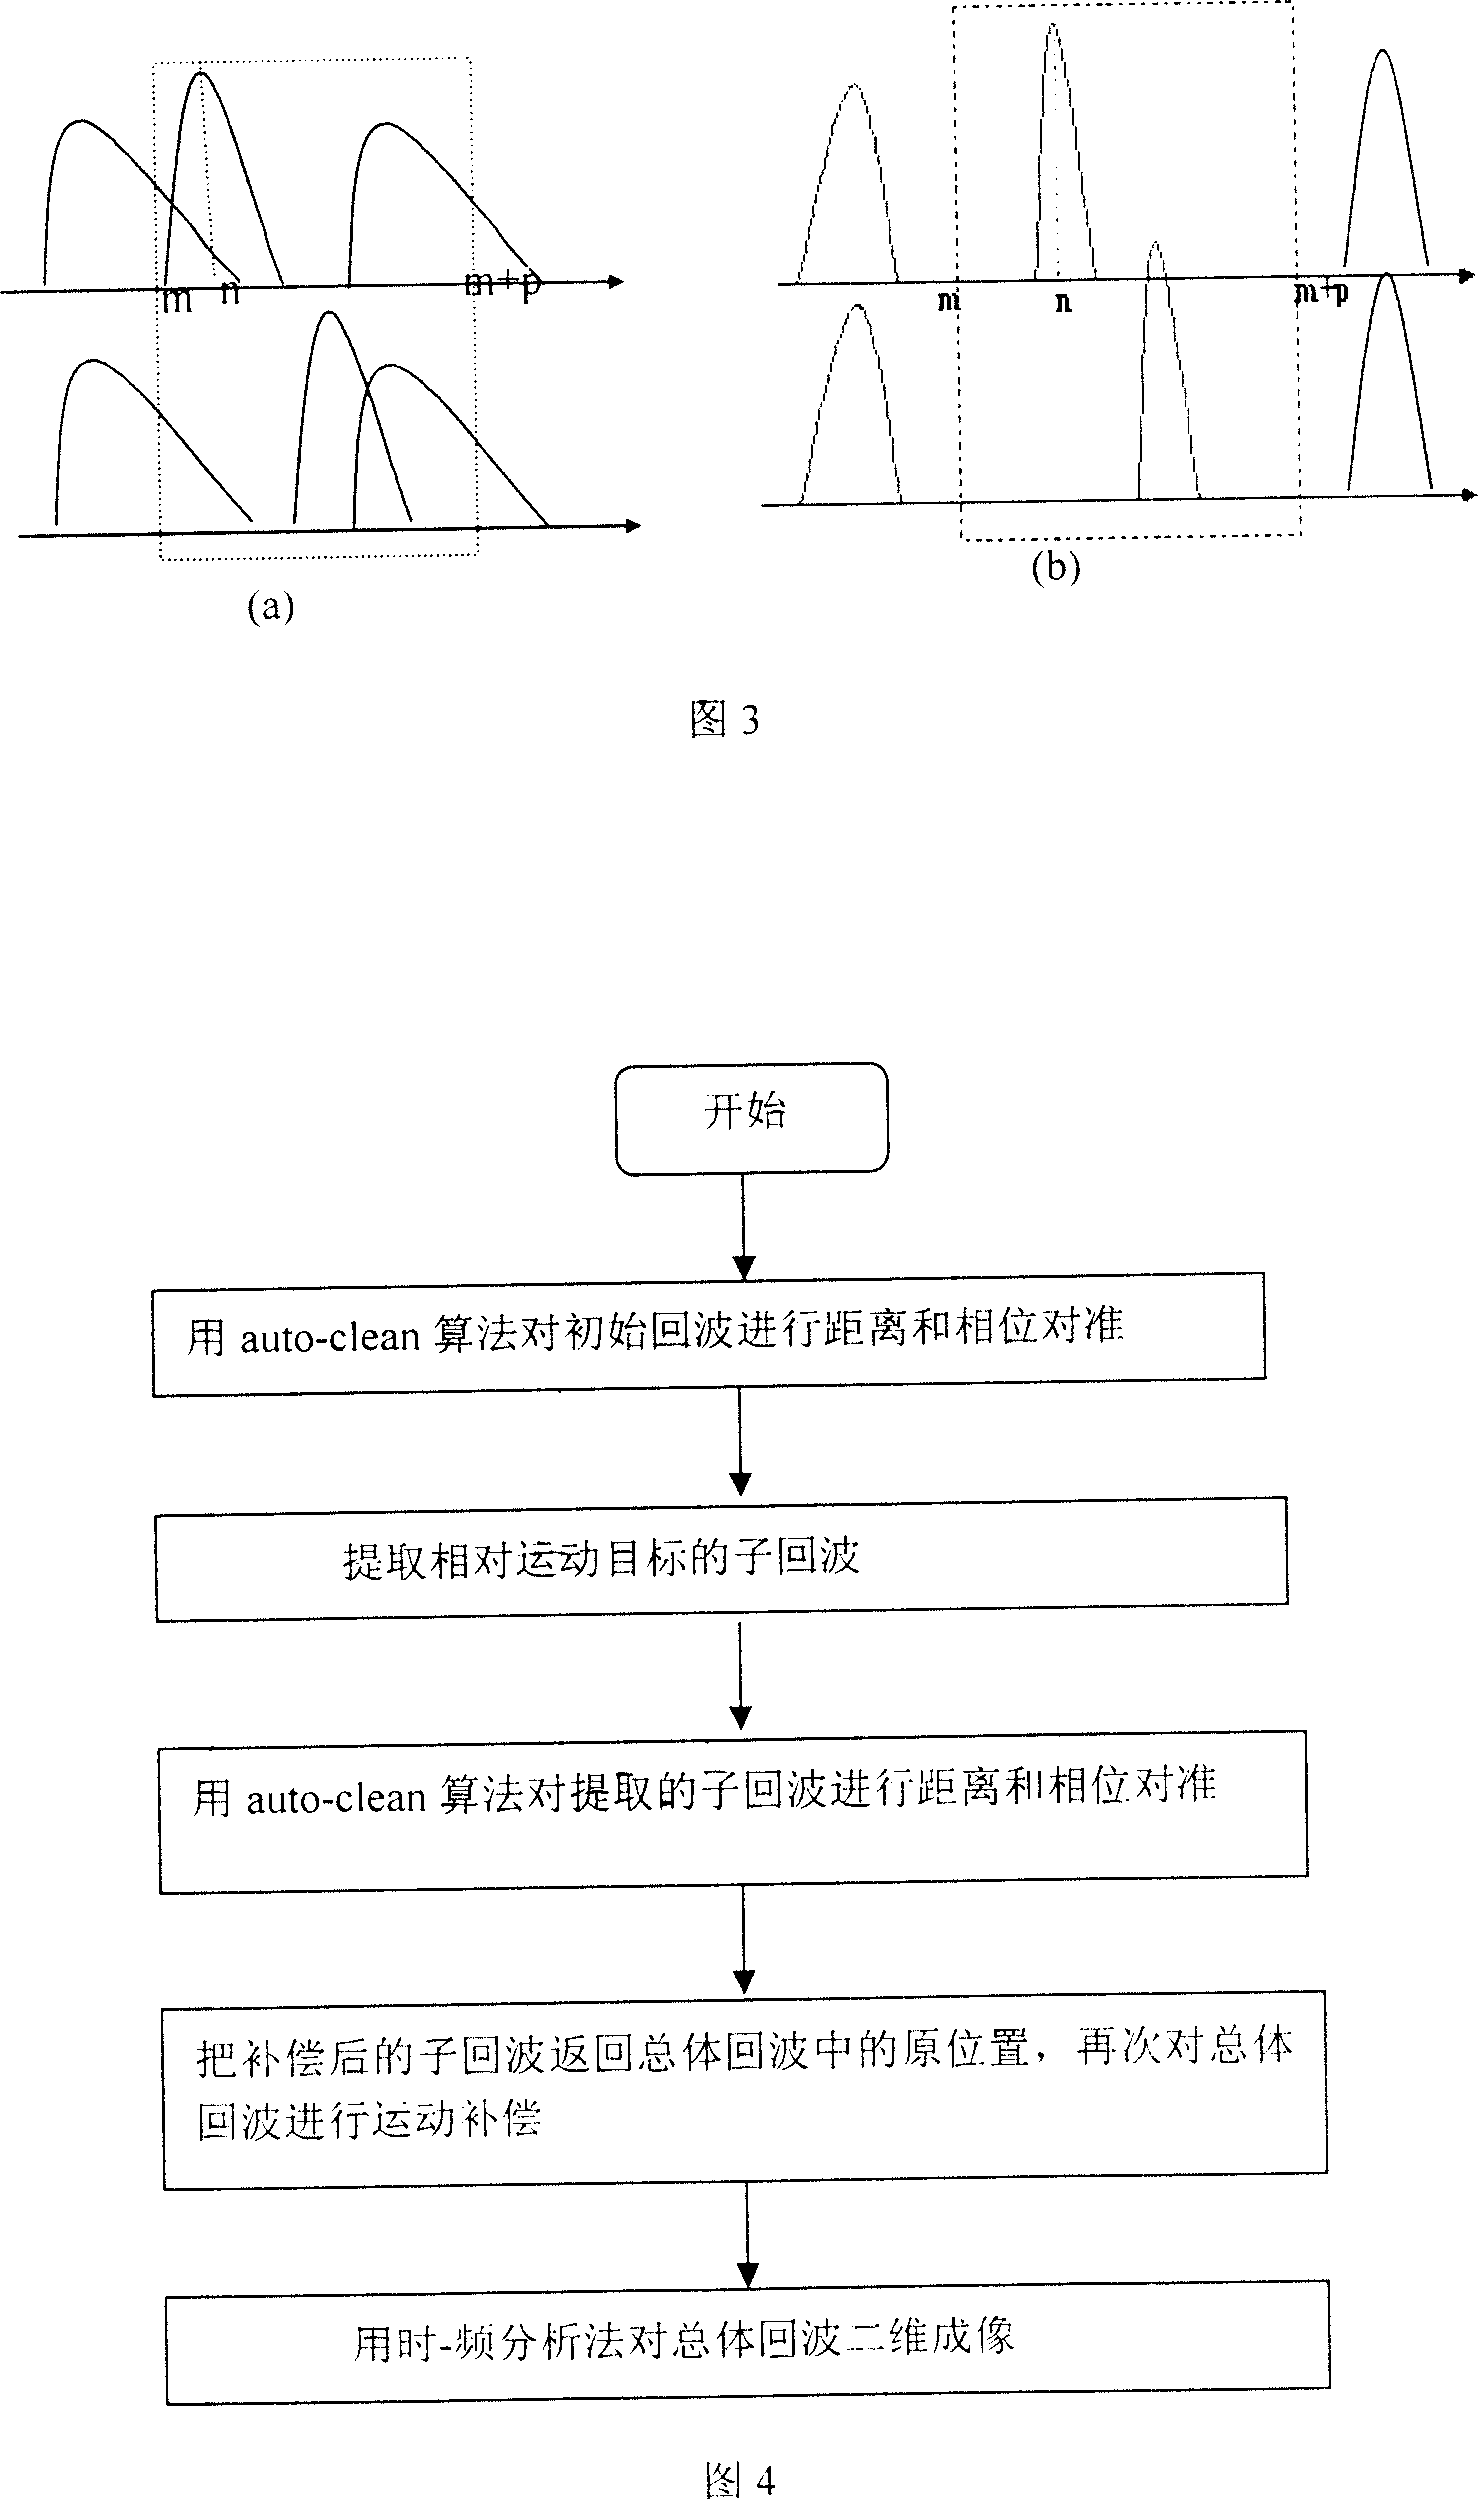 Method for compensating relative motion of mobile multiple objective for reverse synthetic aperture radar